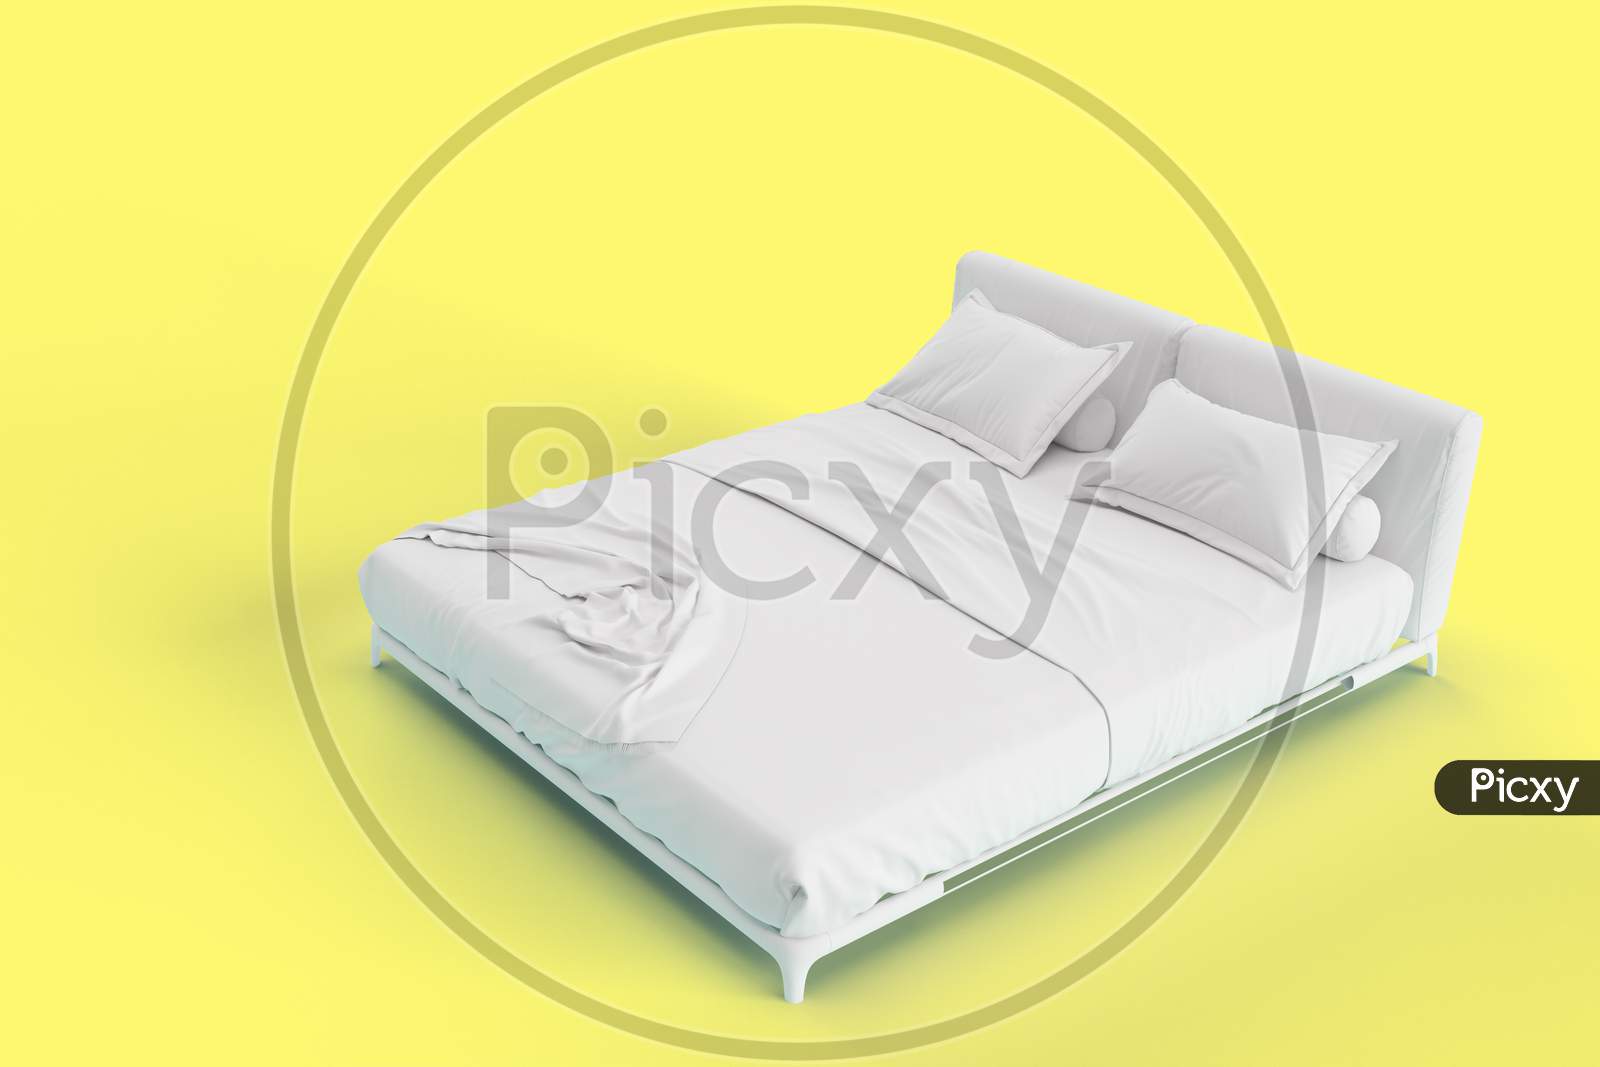 3D Render Right Side Angle View Of White Bed With White Pillow Cover And White Bed Sheet And Blanket For Mockup With A Solid Yellow Background.